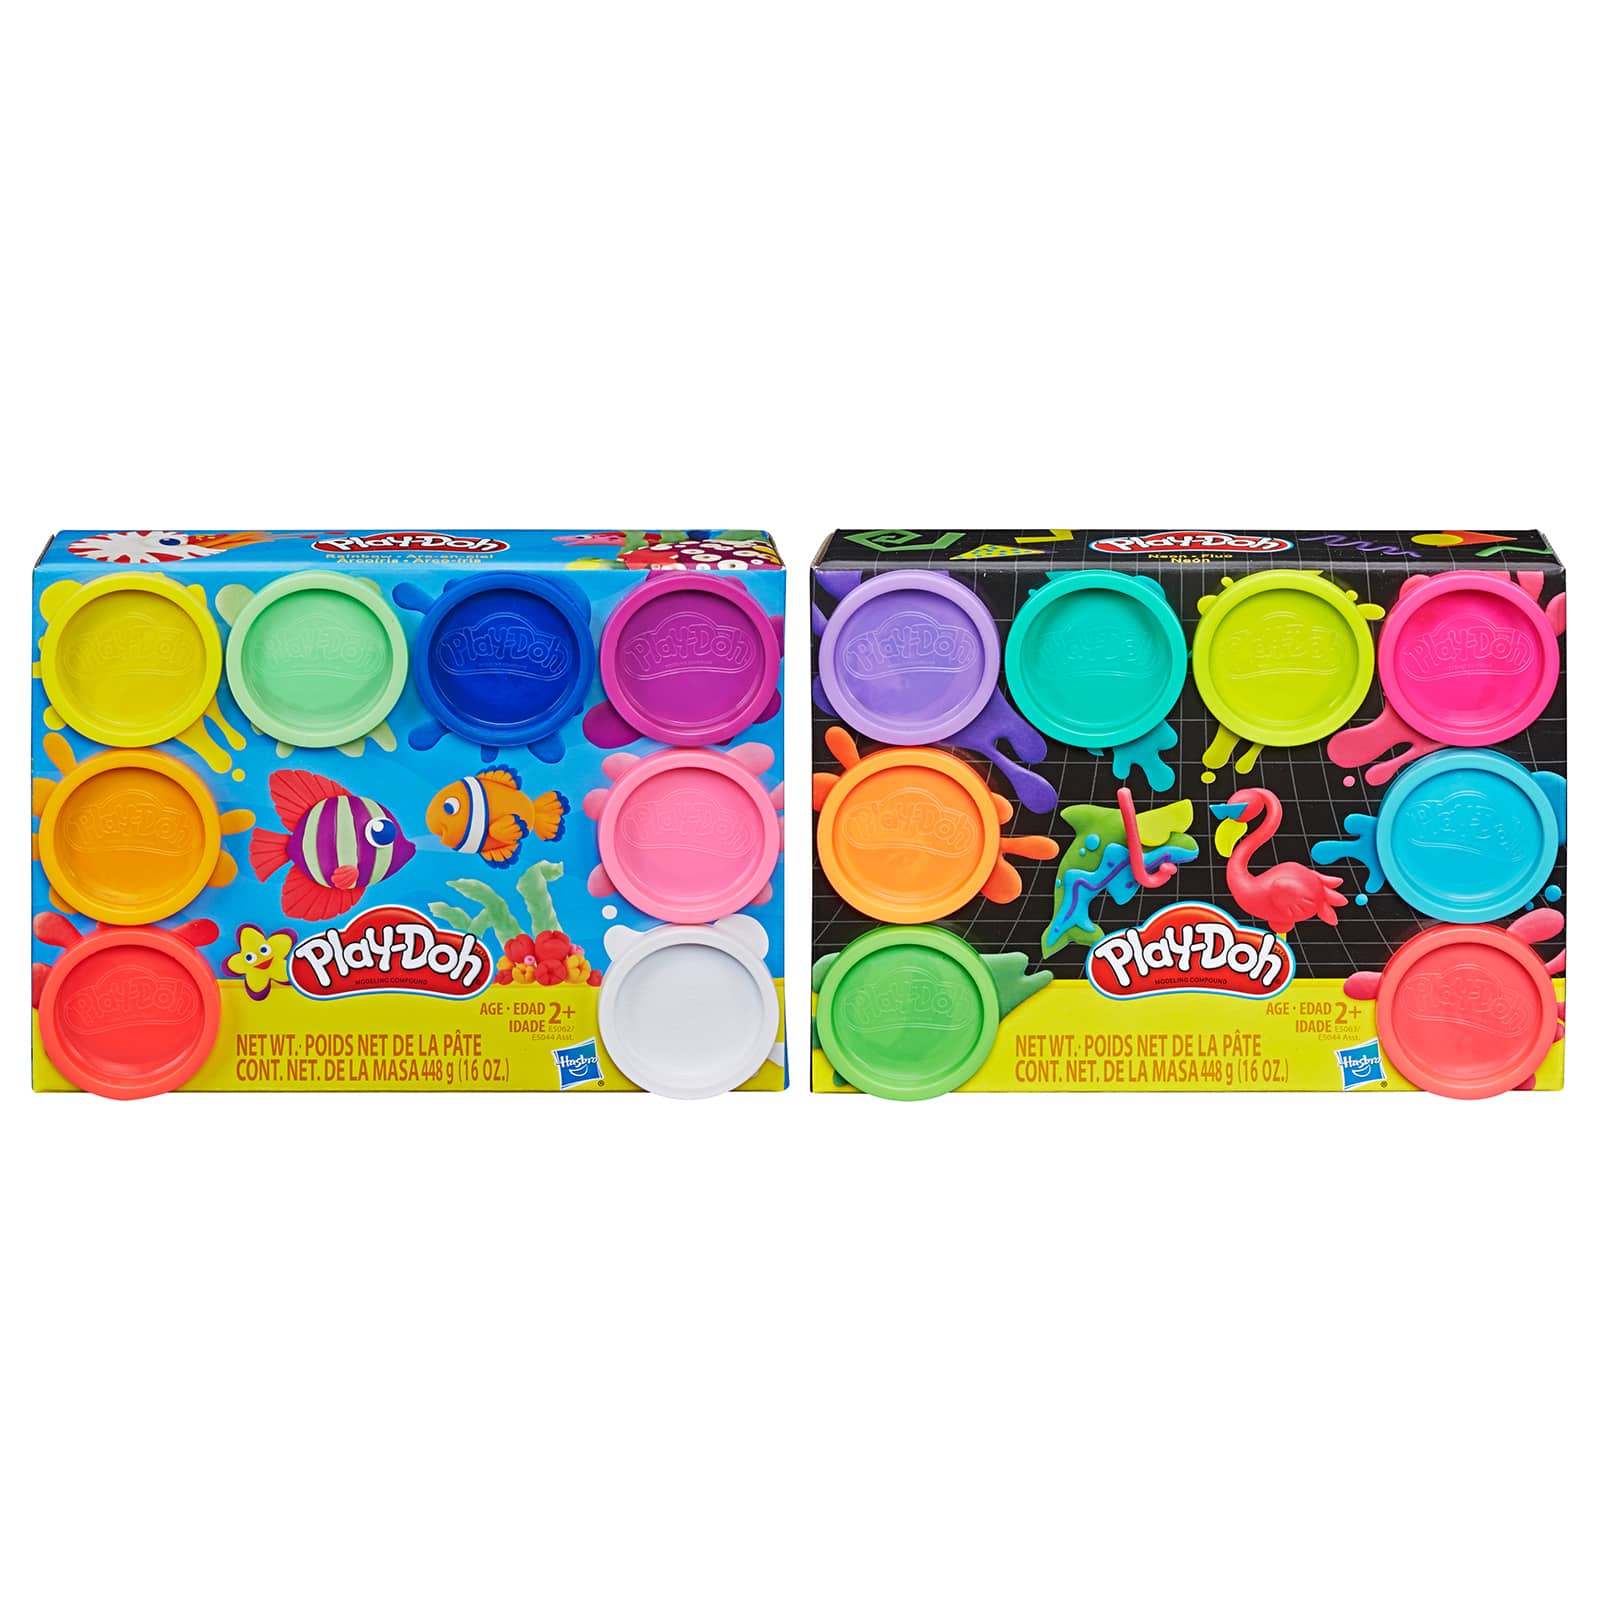 play doh clay online shopping